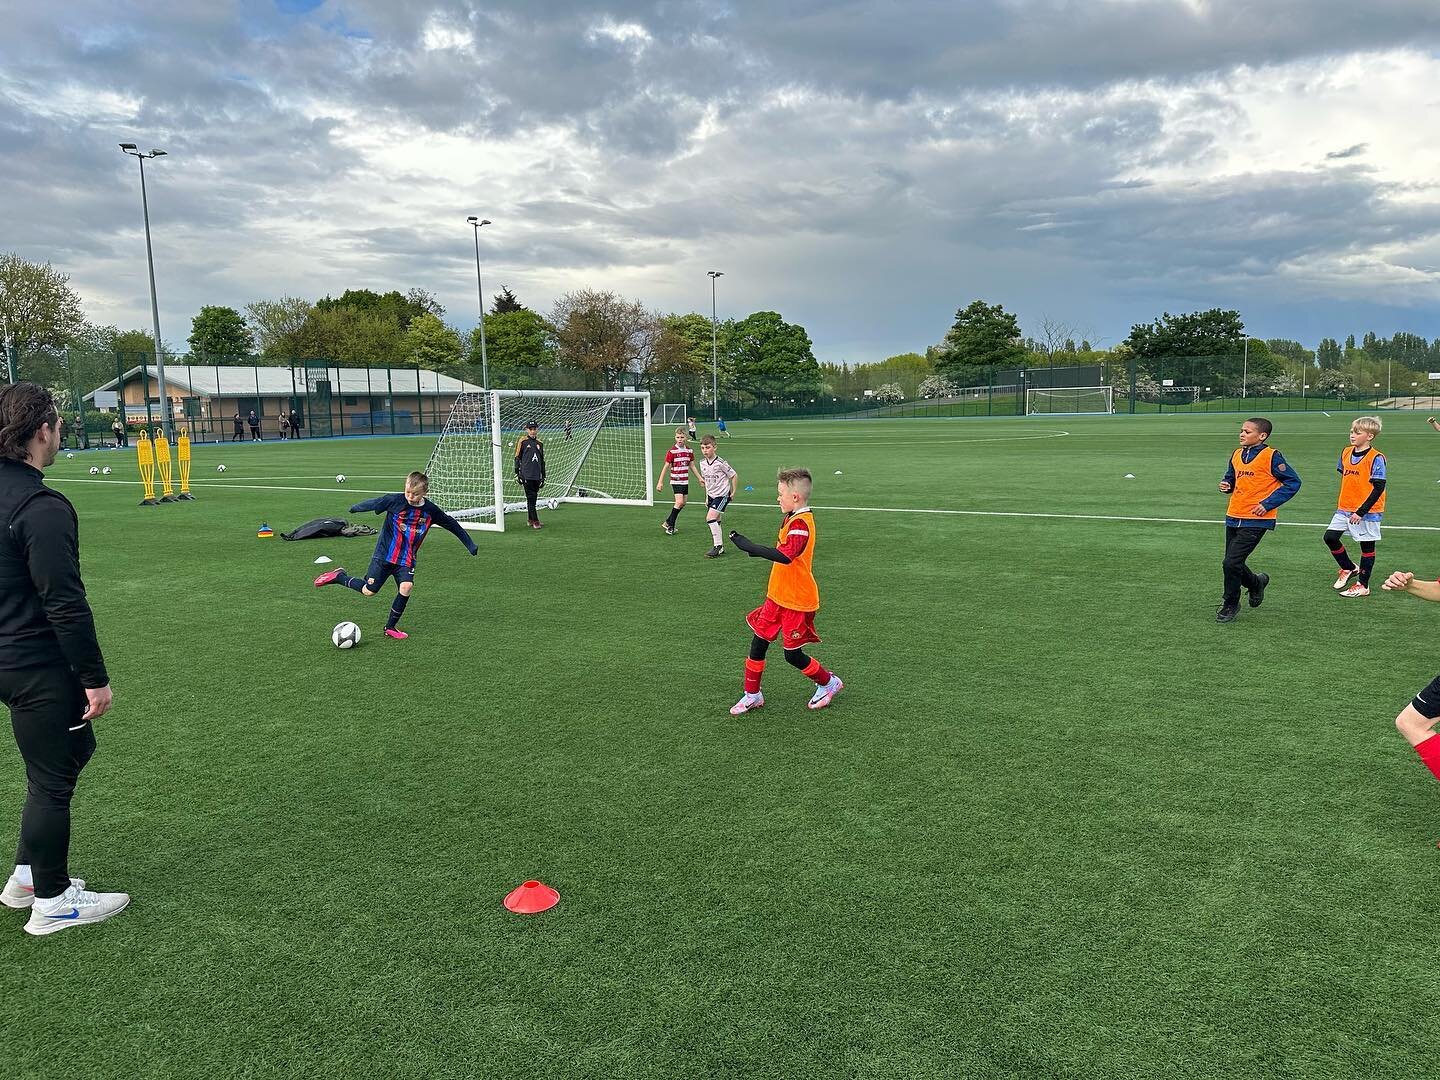 Our next session is tomorrow evening‼️😃

There&rsquo;s still time to sign up 👇

www.kickonacademy.com 📲💻

Contact us 👇

kickonacademy@outlook.com 📧 

Team KONA ⚽️🧤
#football #coaching #team #KONA